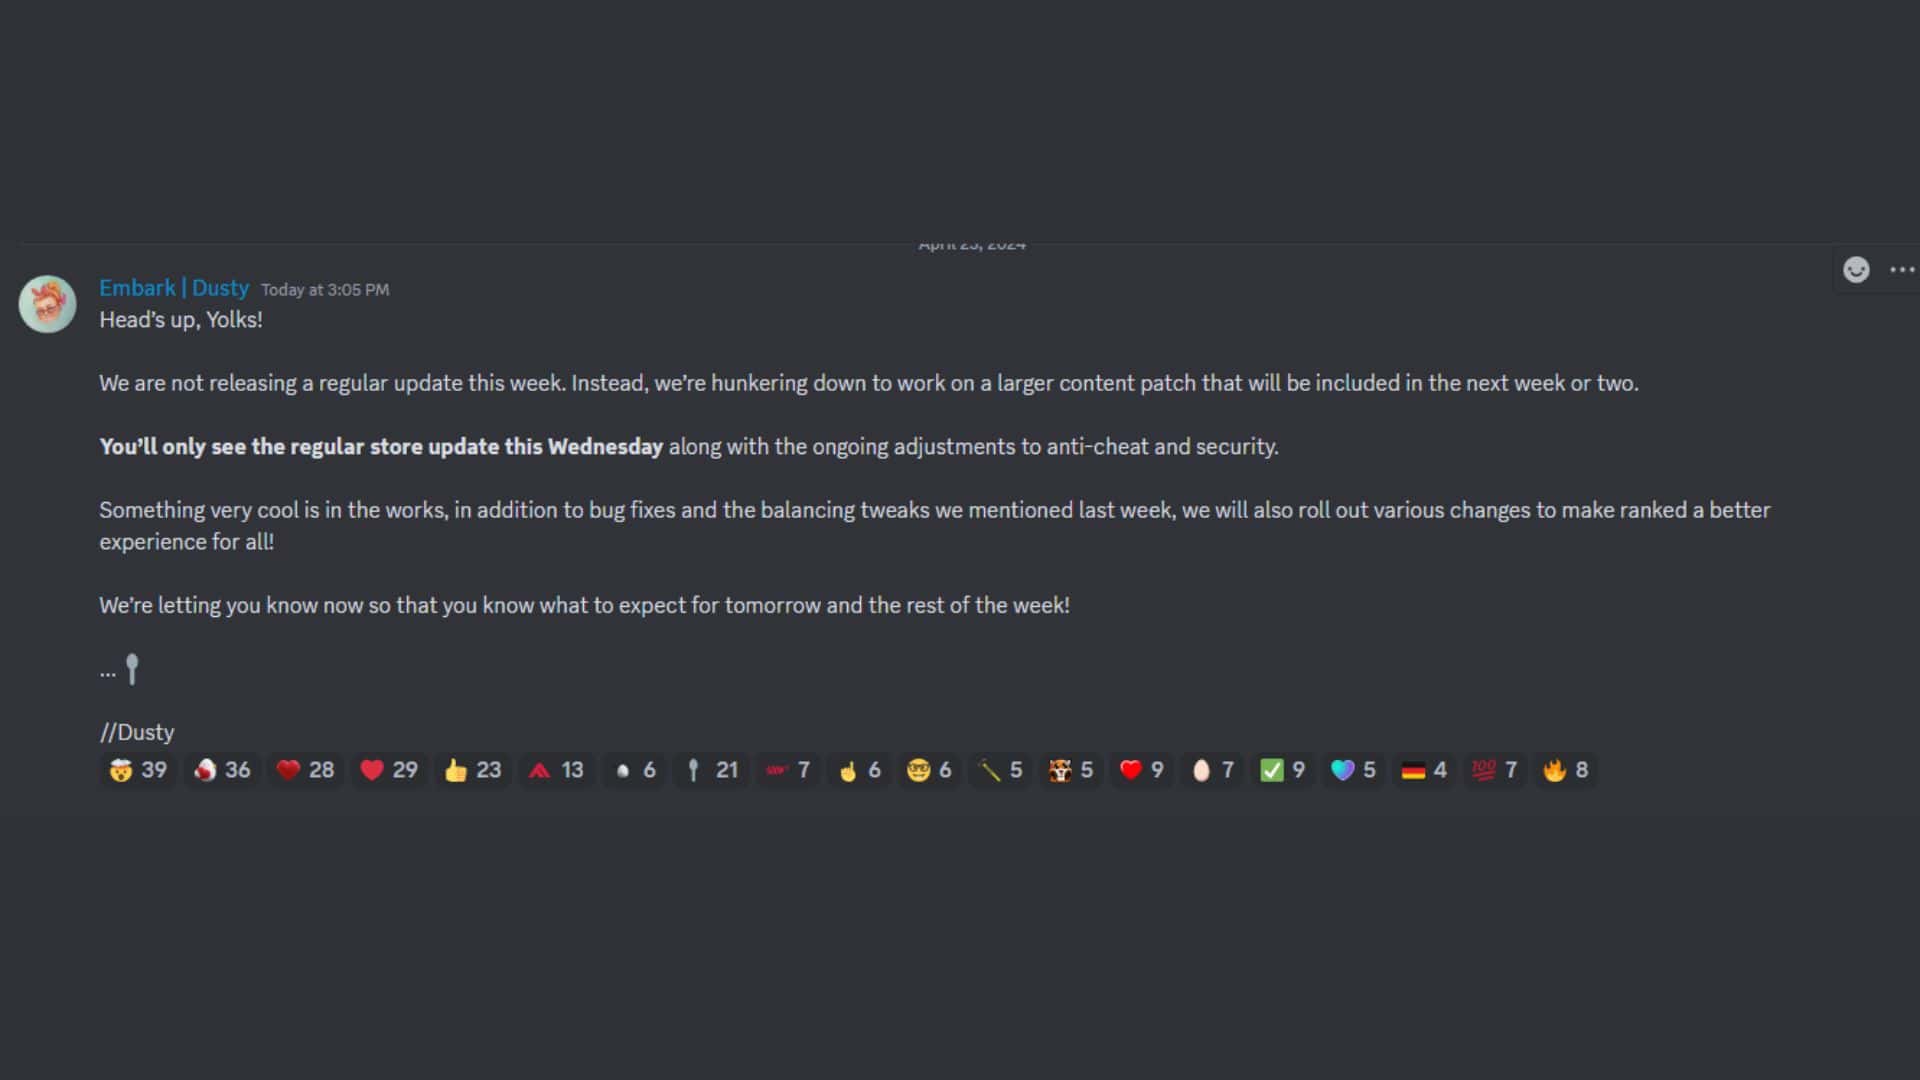 The Finals no new update this week Discord